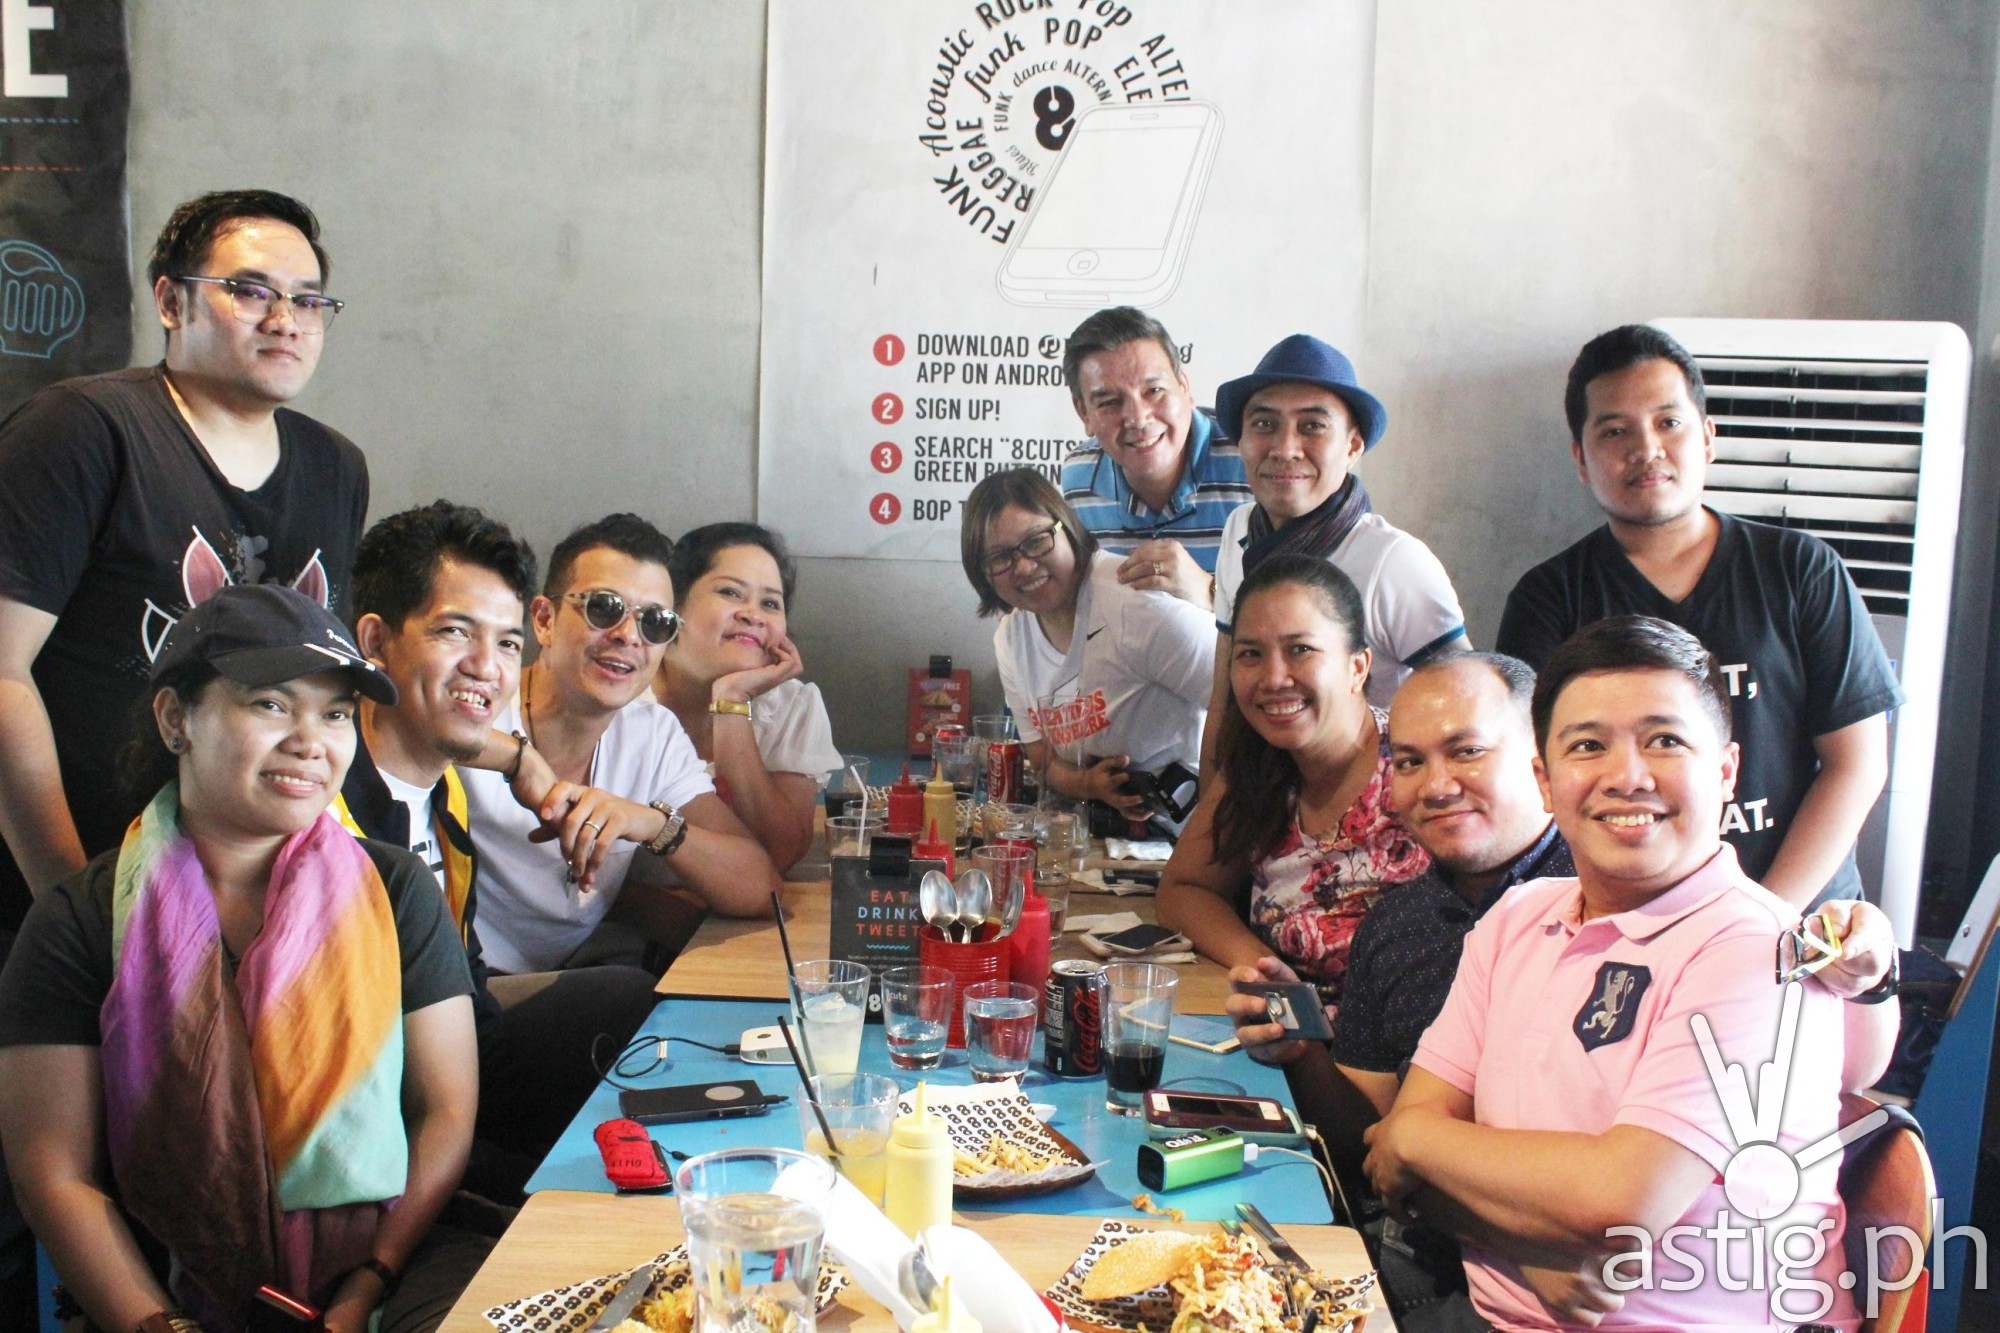 Bloggers were happy as they were able to talk intimately with Jericho Rosales.